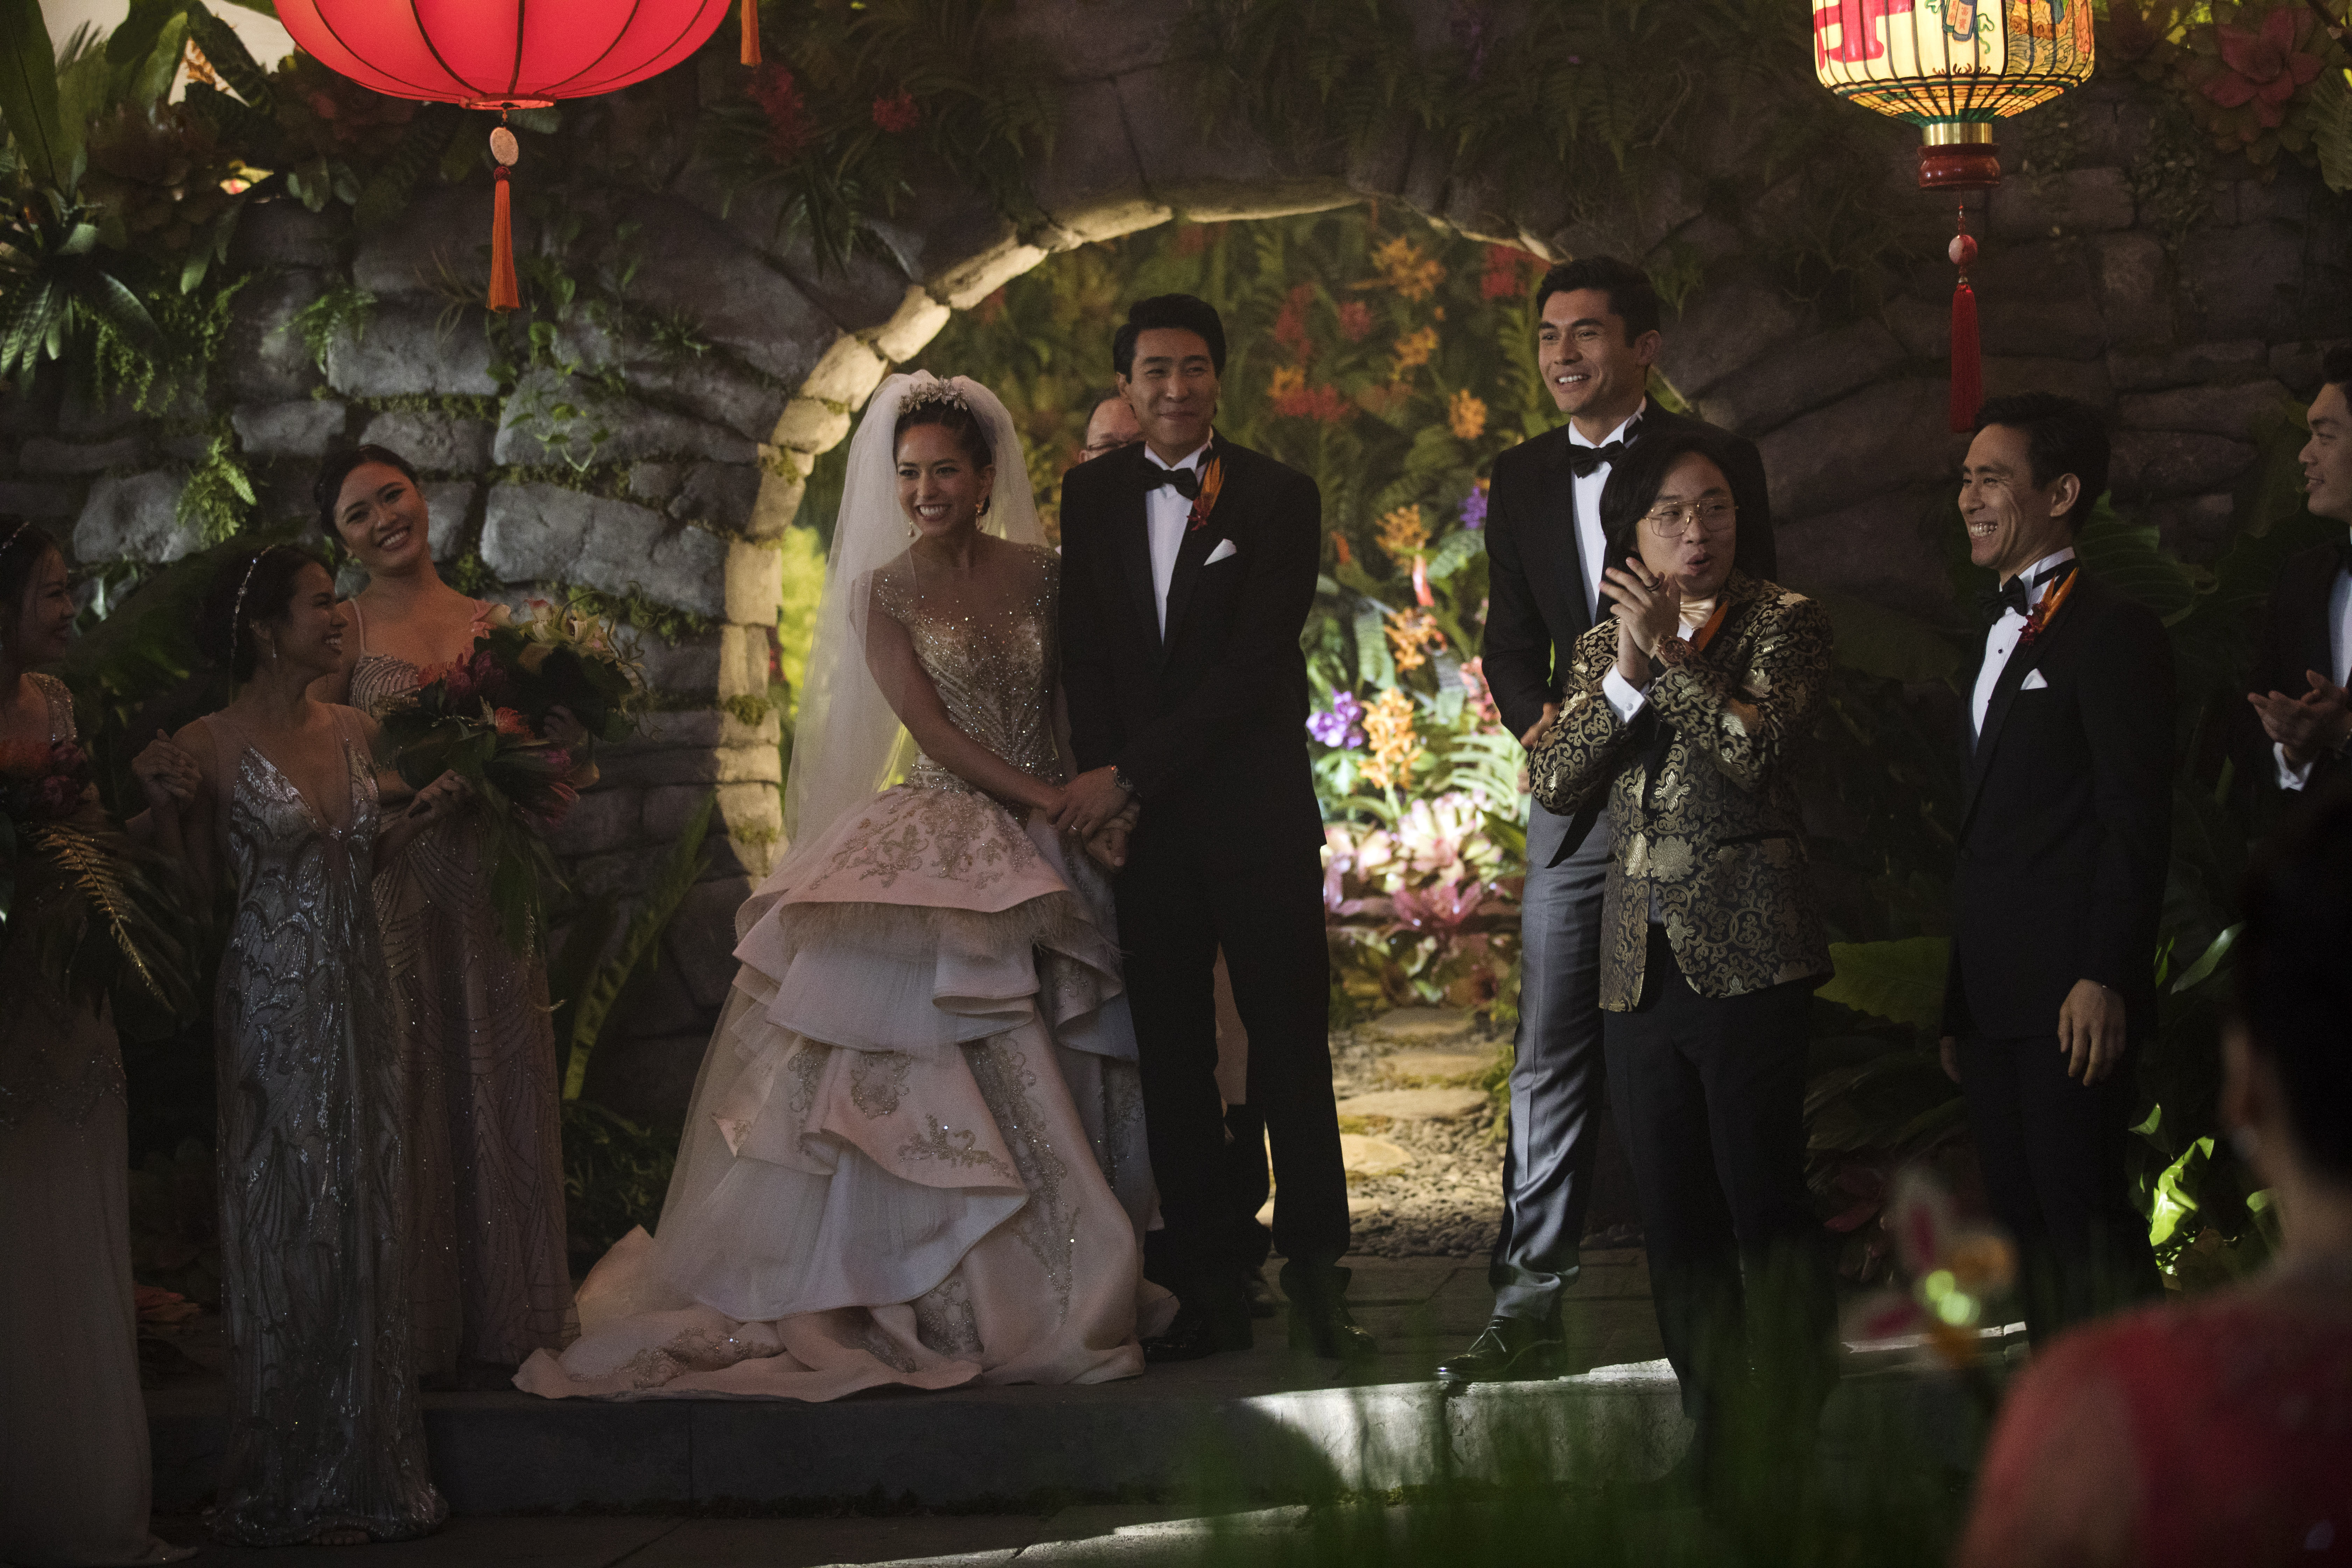 Photo Credit: Sanja Bucko Caption: (Center-Right) SONOYA MIZUNO as Araminta, CHRIS PANG as Colin, HENRY GOLDING as Nick and JIMMY O. YANG as Bernard in Warner Bros. Pictures' and SK Global Entertainment's and Starlight Culture's contemporary romantic comedy "CRAZY RICH ASIANS," a Warner Bros. Pictures release.